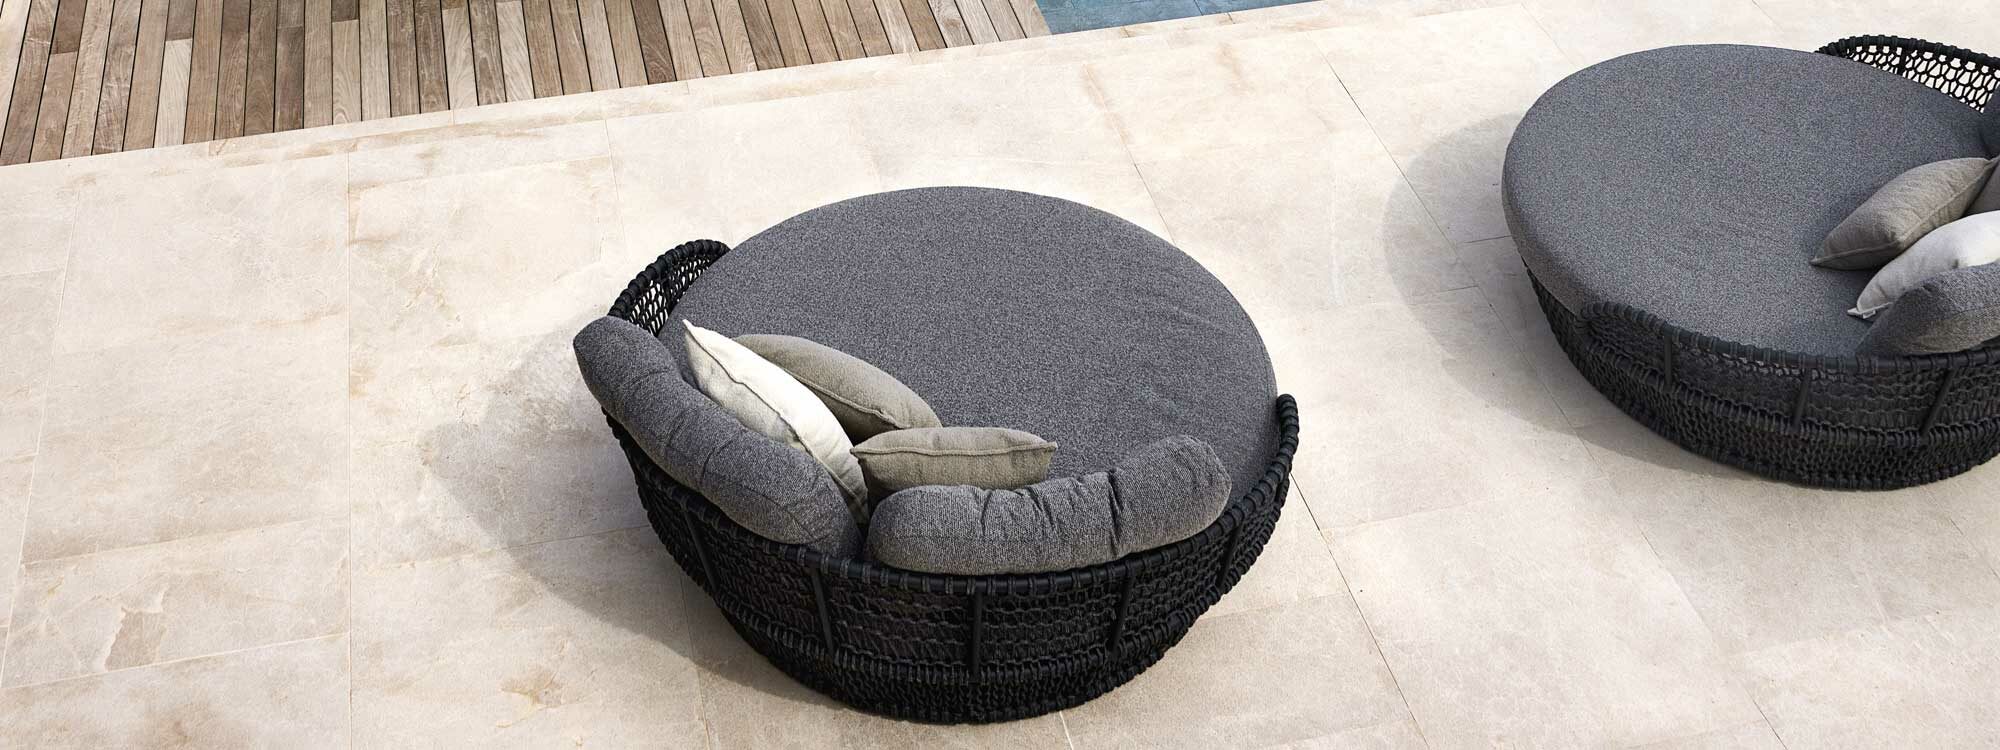 Image of birds eye view of Cane-line Ocean Large daybed in dark grey SoftRope & dark-grey Cane-line Wove fabric cushions